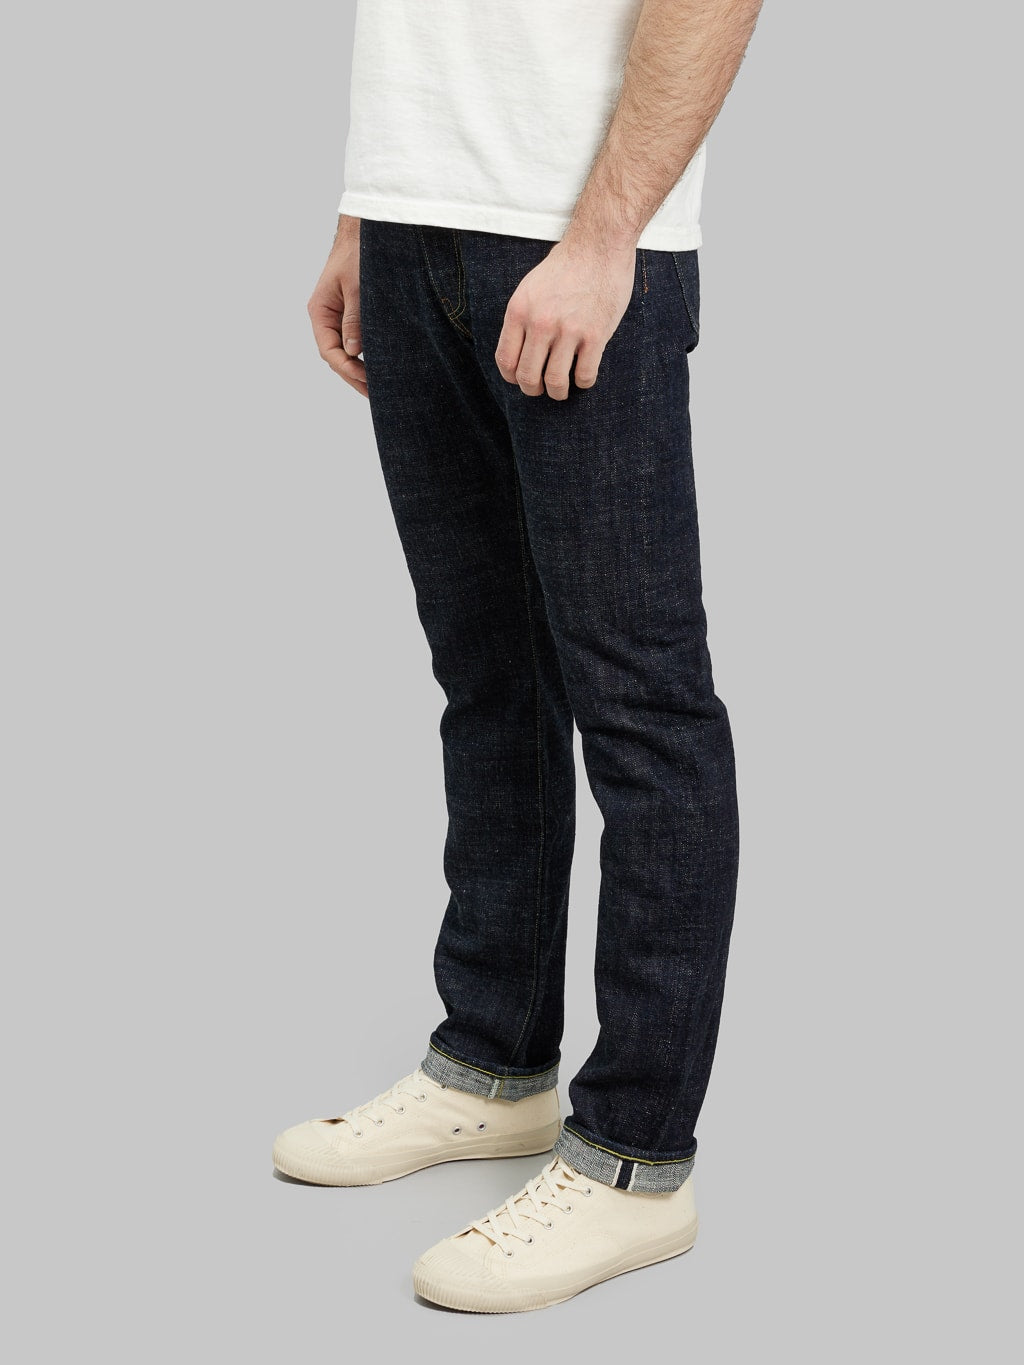 Fob factory slim straight jean side fit